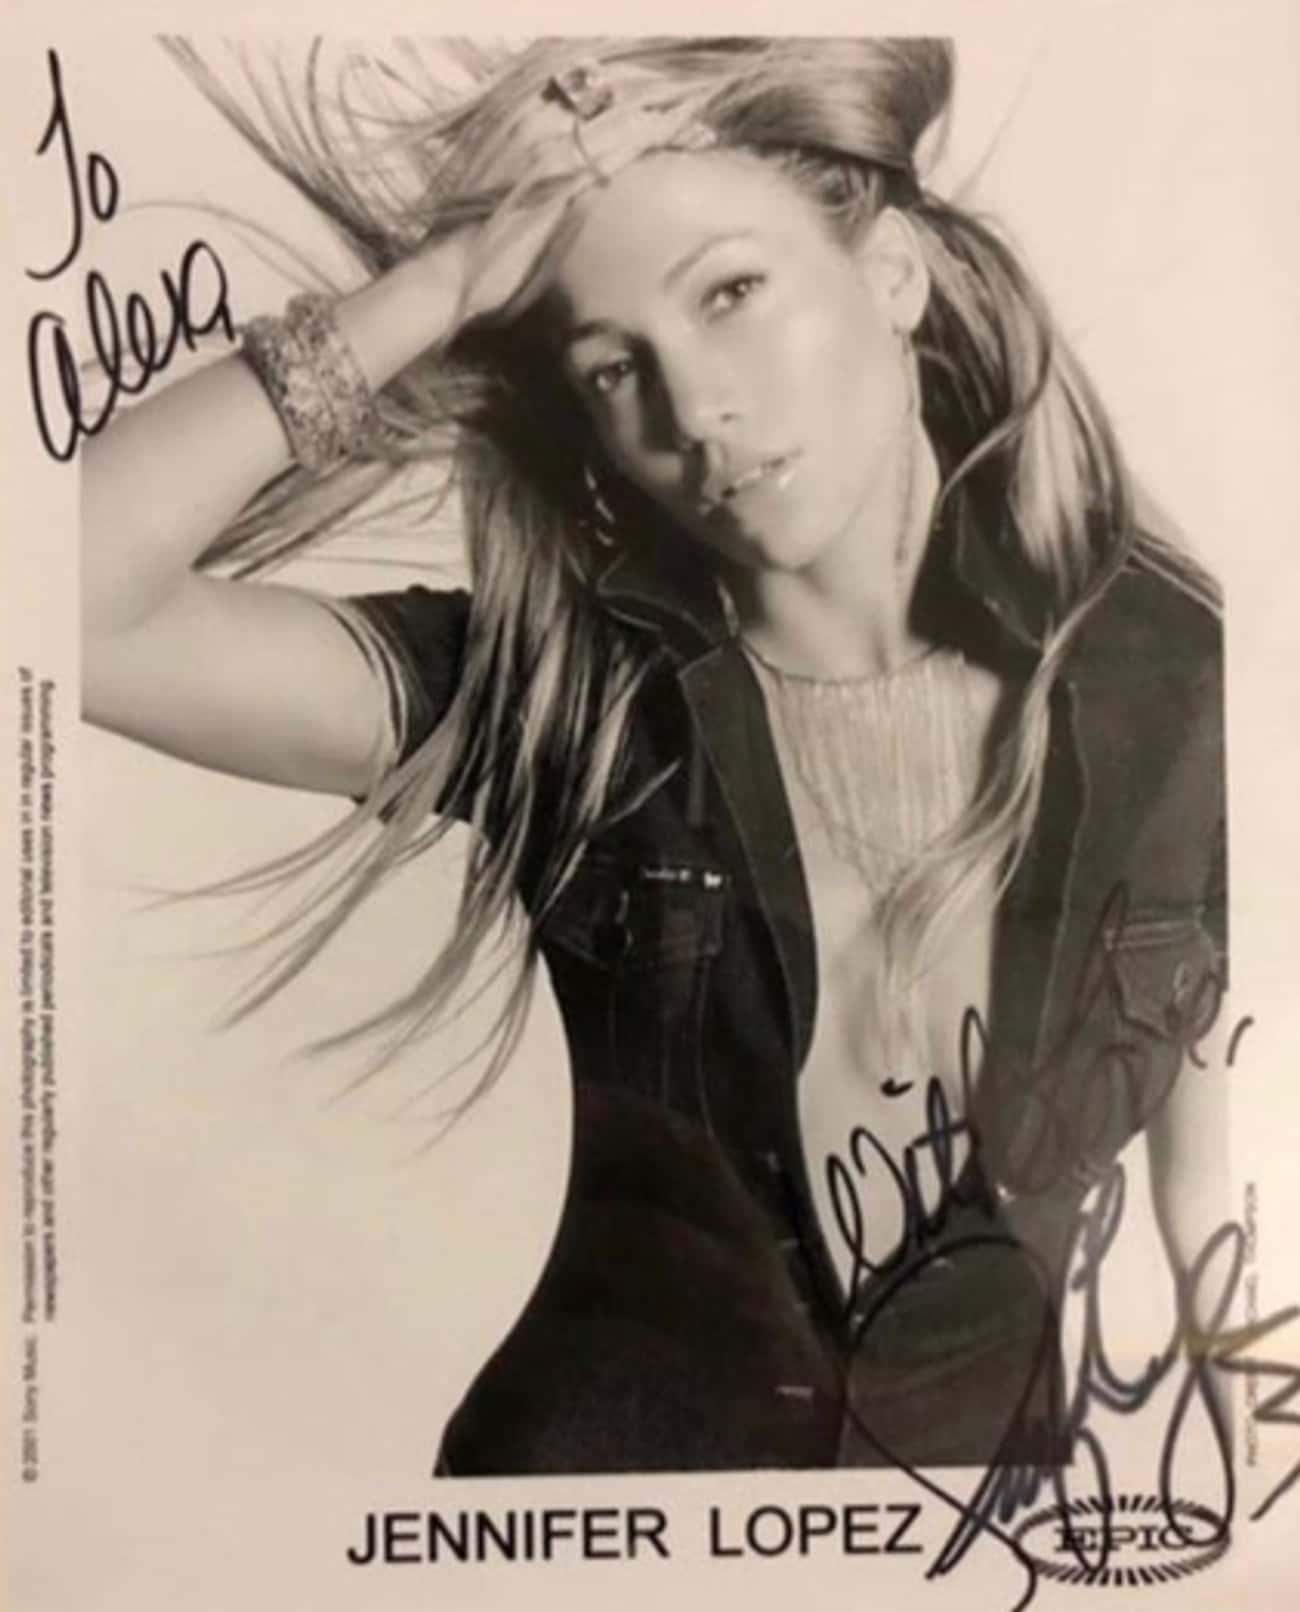 1999: Rodriguez Meets Lopez And Asks For Her Autograph